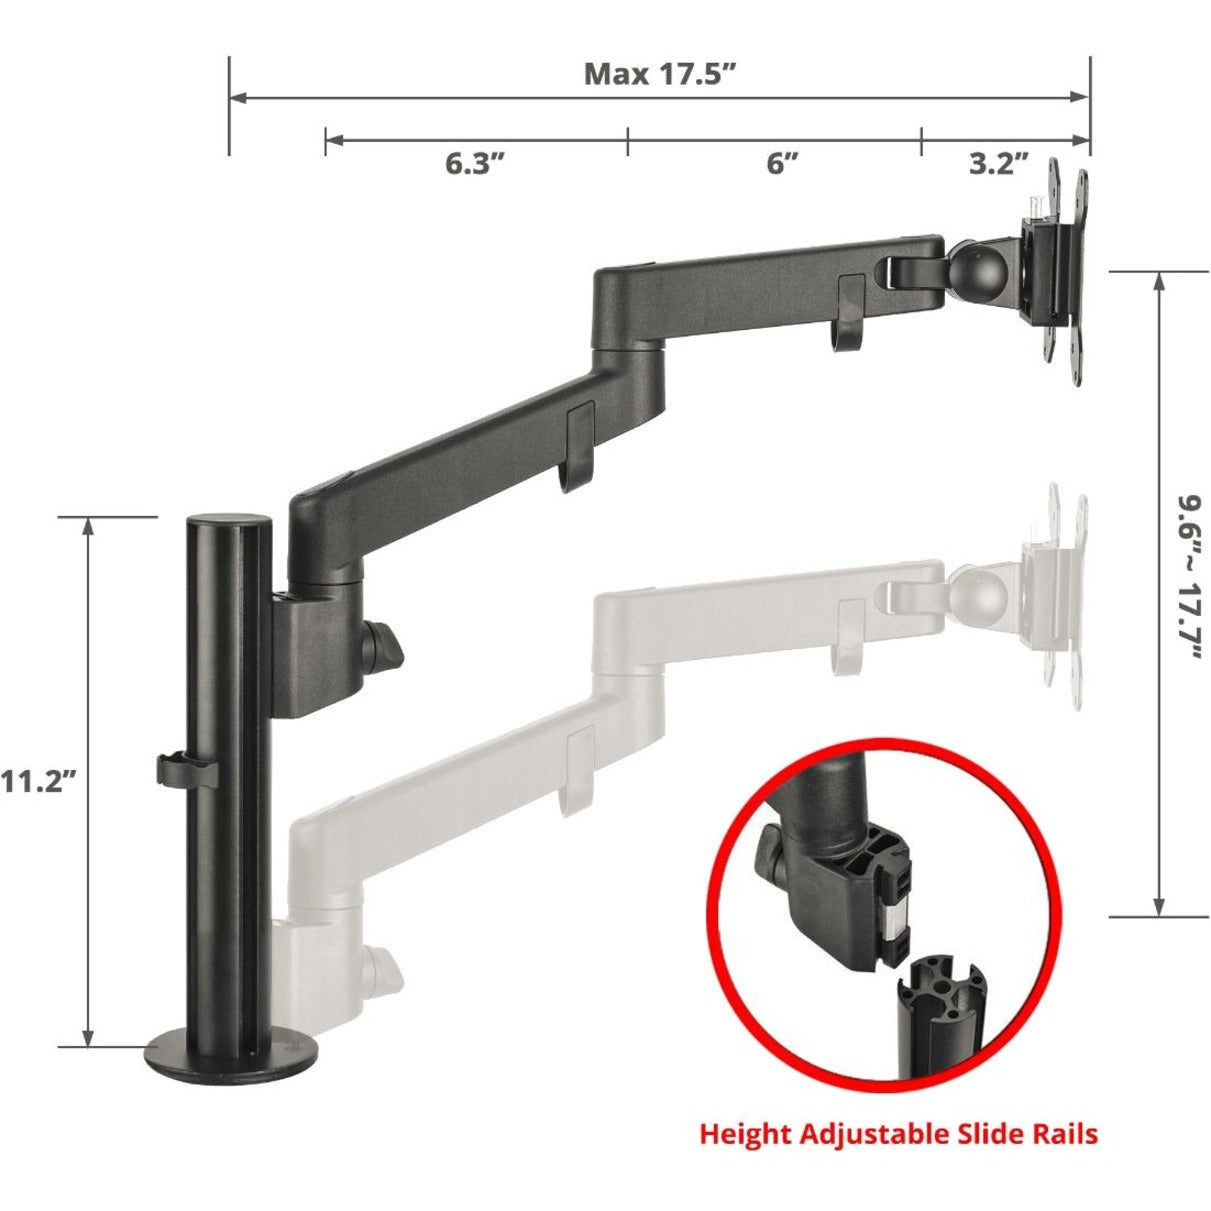 SIIG CE-MT3D11-S1 Single Pole Multi-Angle Articulating Arm Single Monitor Desk Mount, Multiple Viewing Angles, Tilt, Swivel, Sturdy